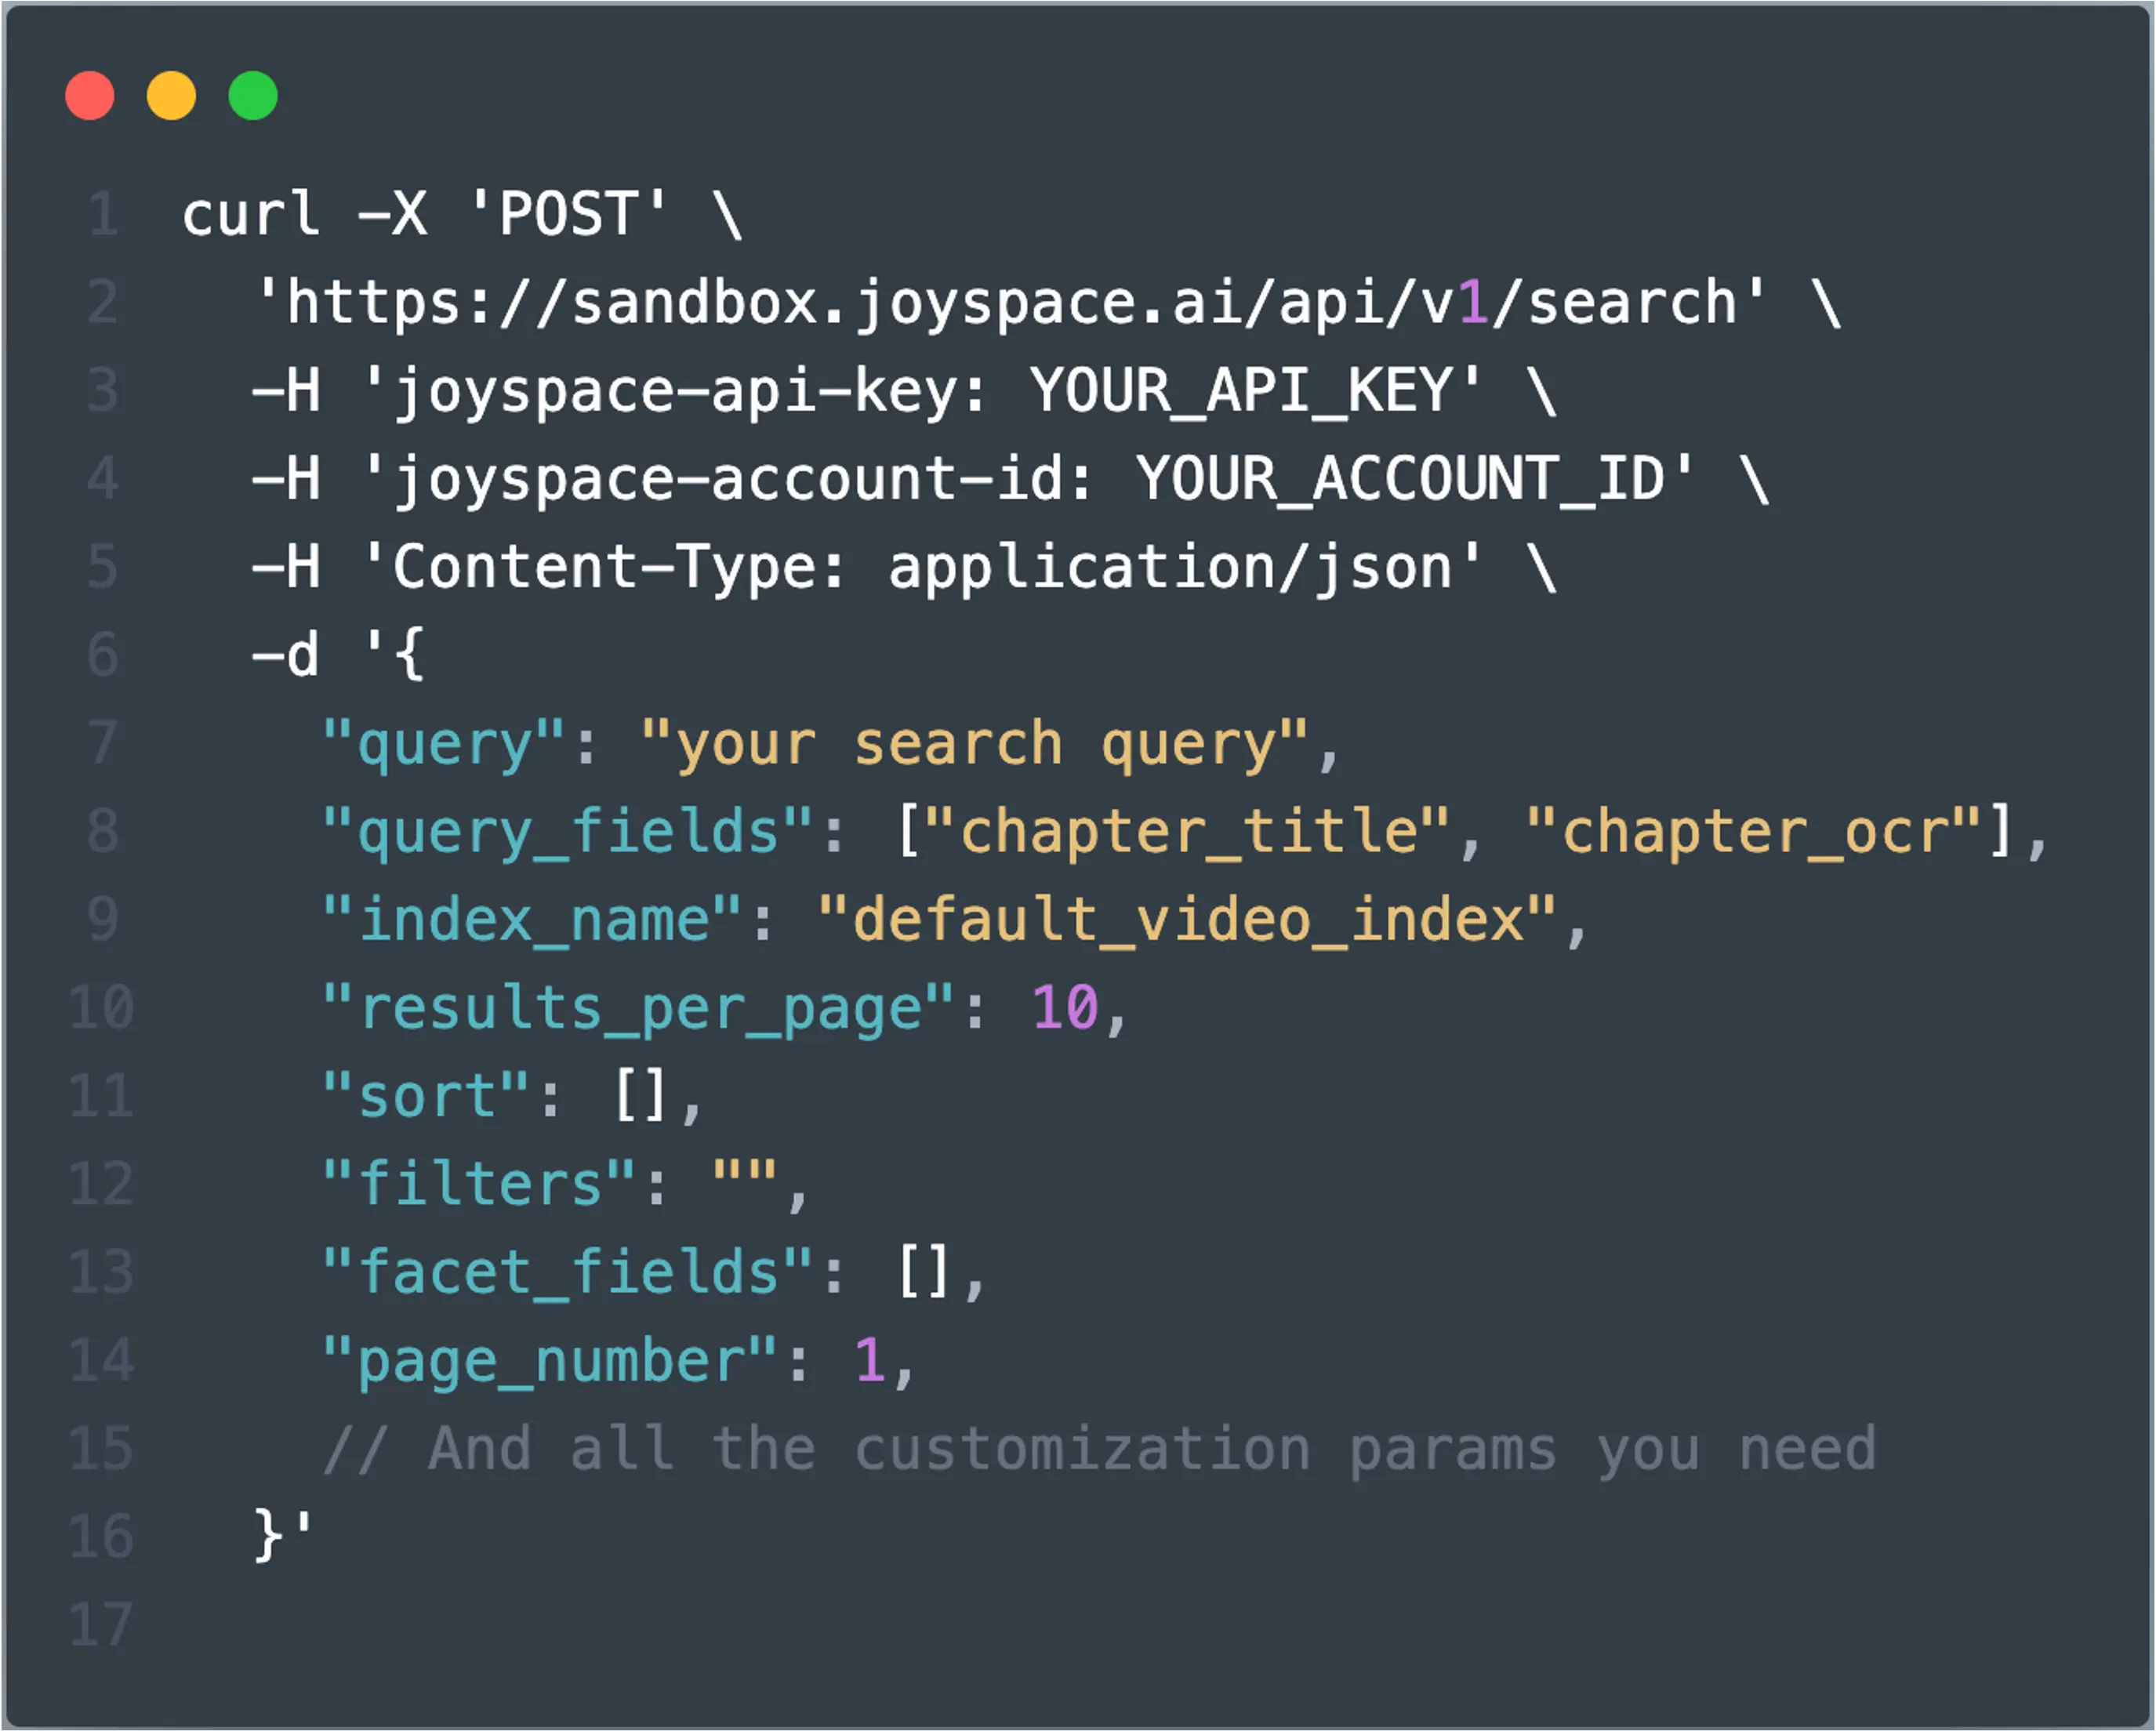 Joyspace Video Search request using cURL. It sends query, conveys which fields to query, which index to query, with possible sorting, faceting and filtering params.